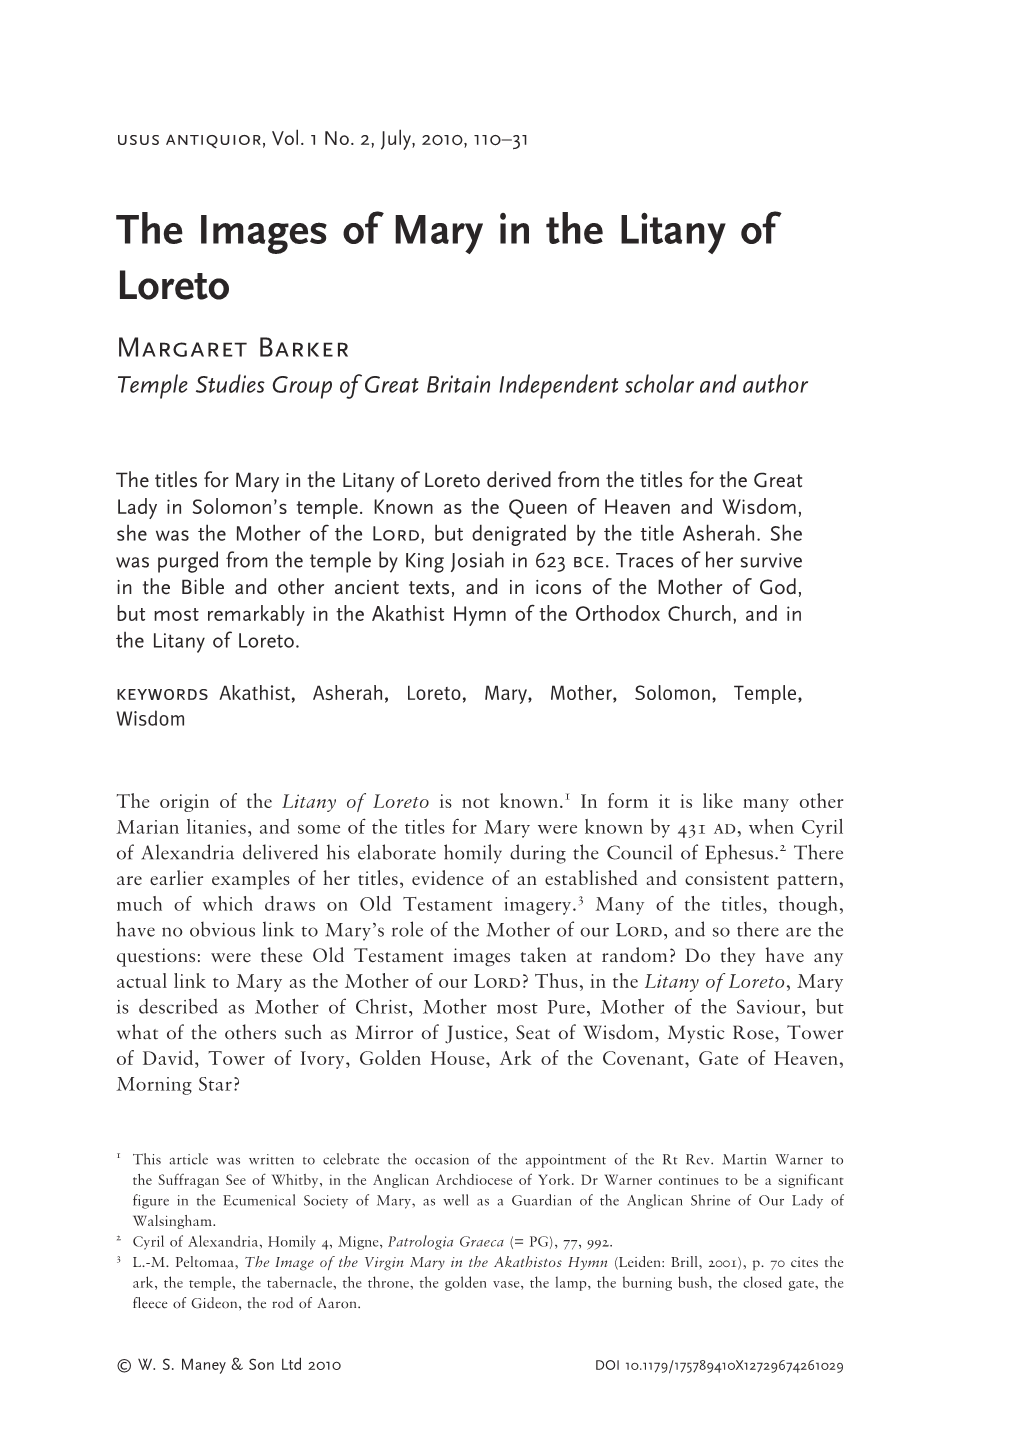 The Images of Mary in the Litany of Loreto Margaret Barker Temple Studies Group of Great Britain Independent Scholar and Author